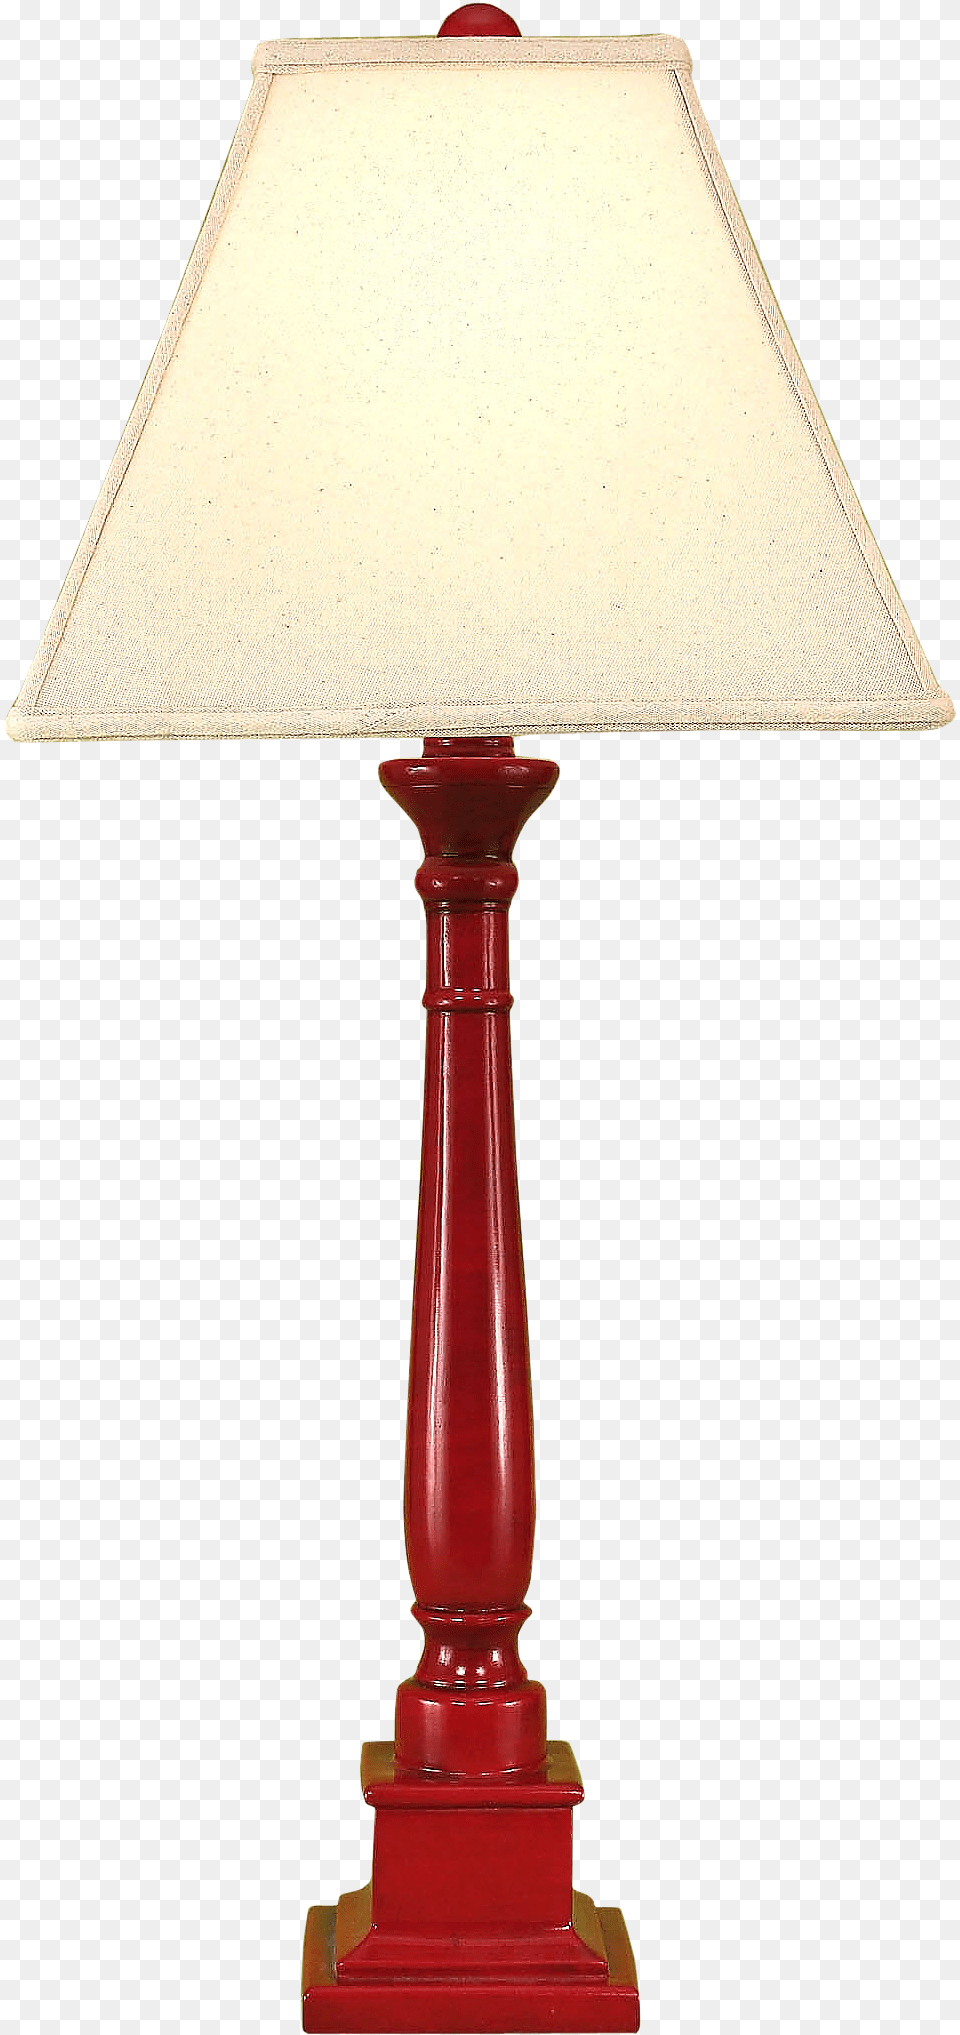 Glazed Brick Red Square Candlestick Table Lamp Lamp, Lampshade, Table Lamp Free Png Download